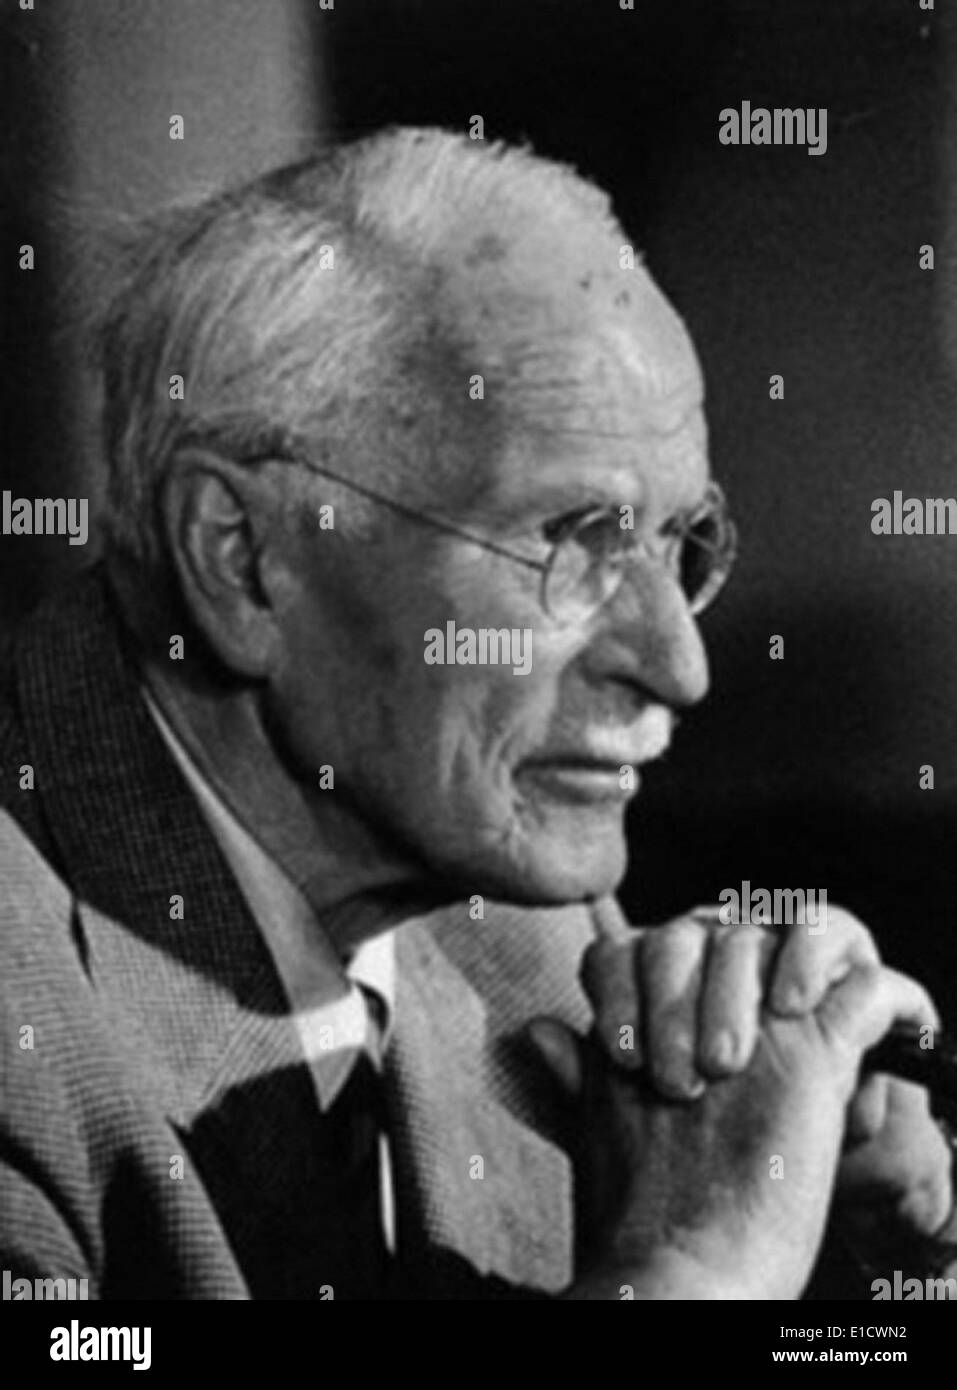 Carl G. Jung (26 July 1875 – 6 June 1961), was a Swiss psychiatrist and psychotherapist who was most famous for founding analytical psychology. Stock Photo